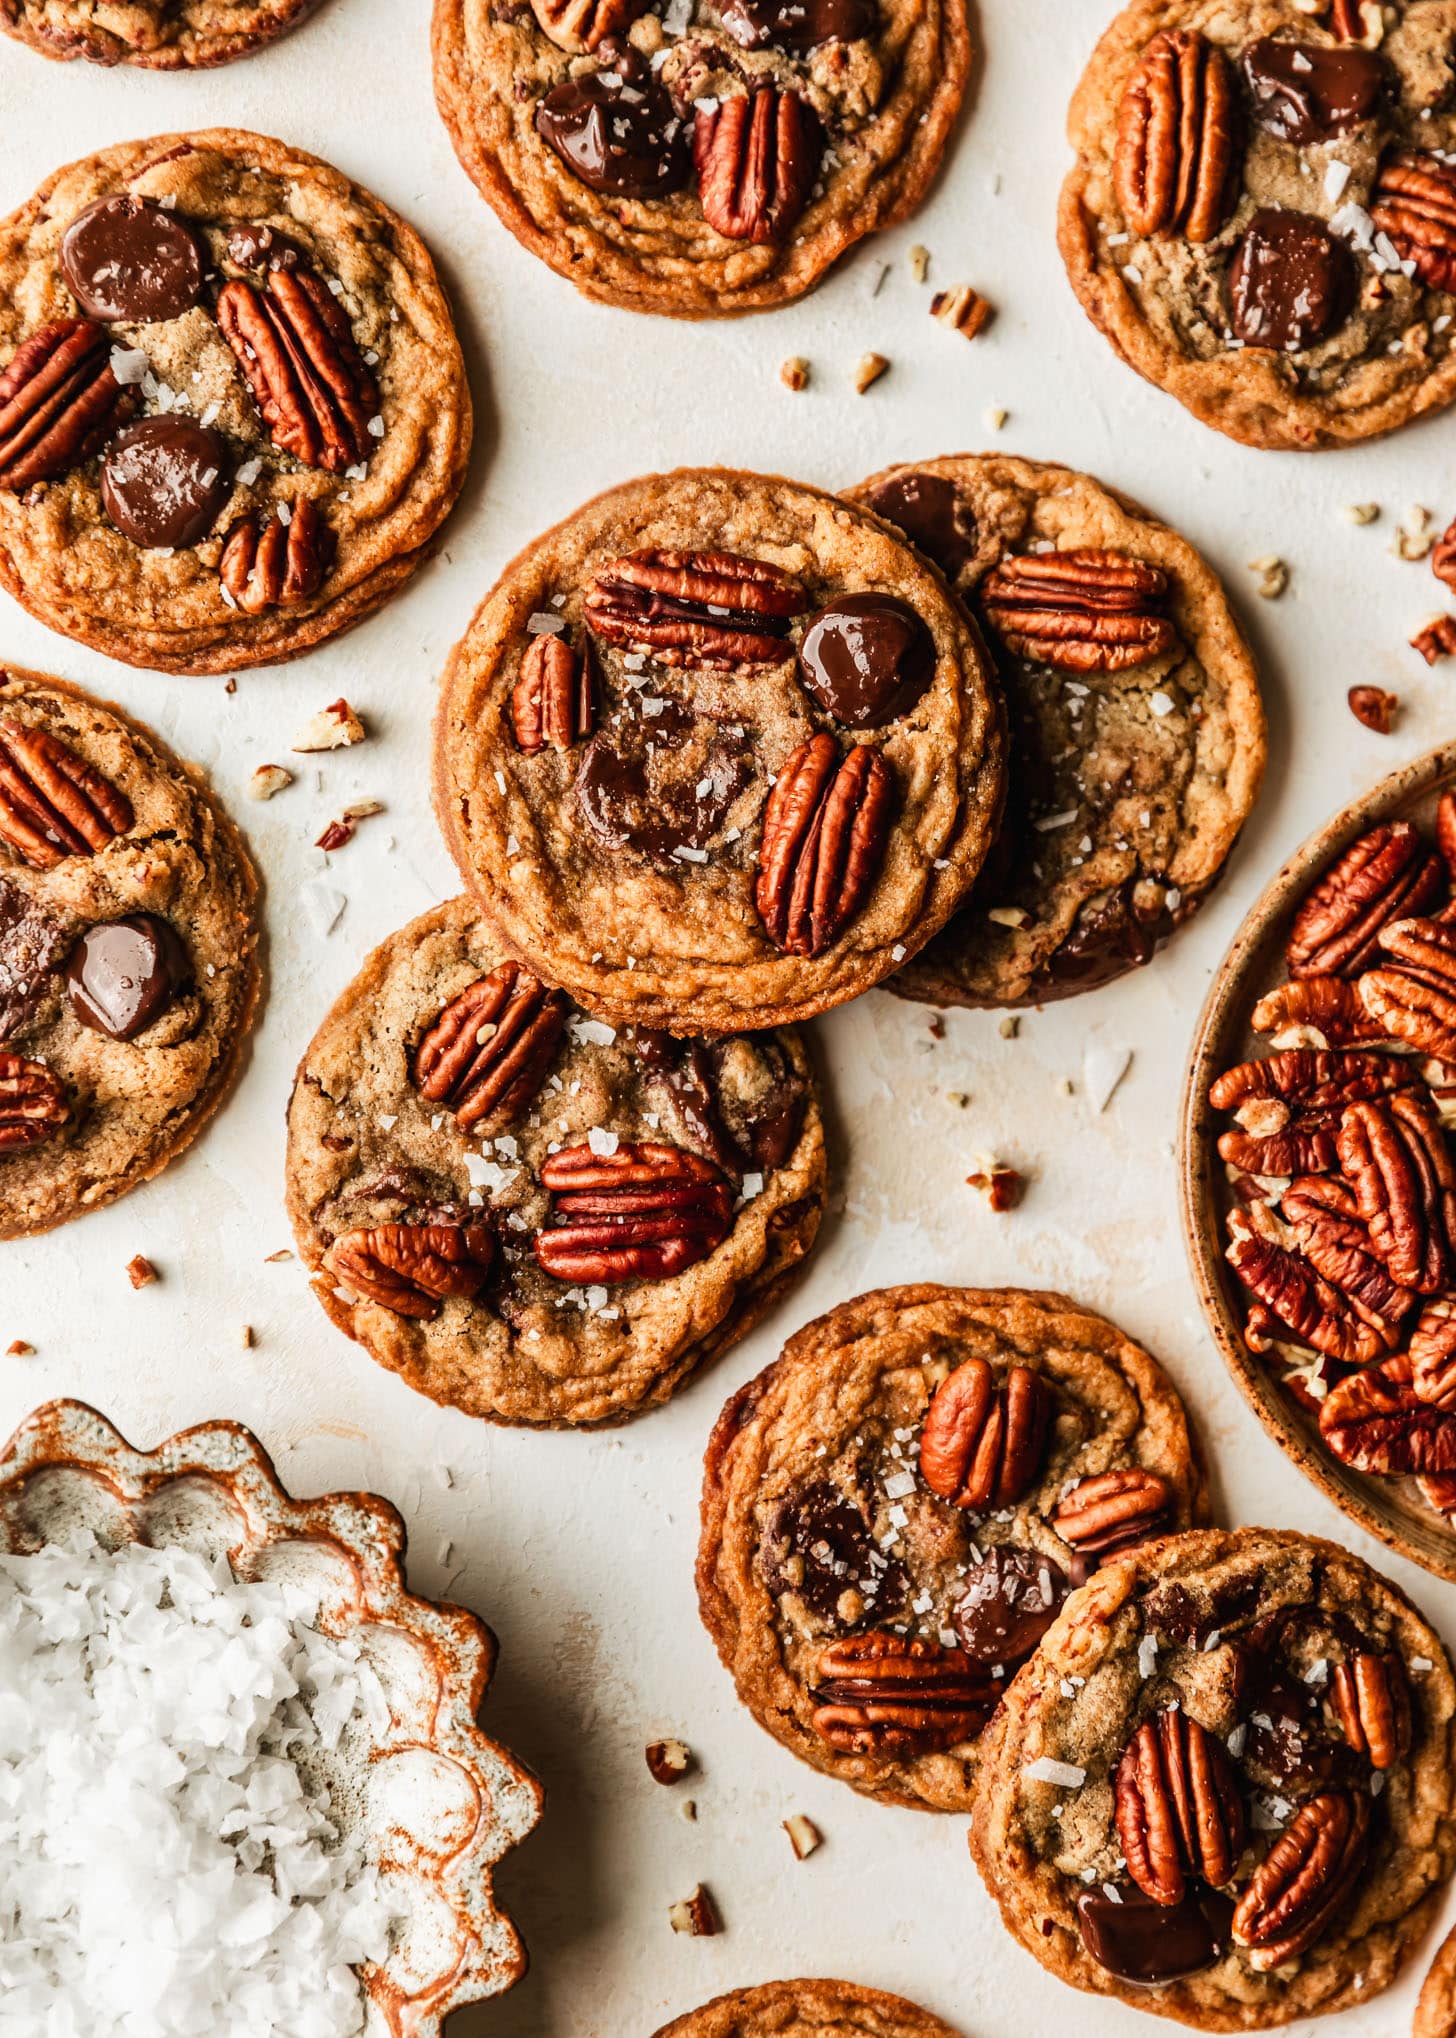 Piles of pecan chocolate chip cookies with brown butter on a tan background next to brown bowls of pecans and flaky salt.